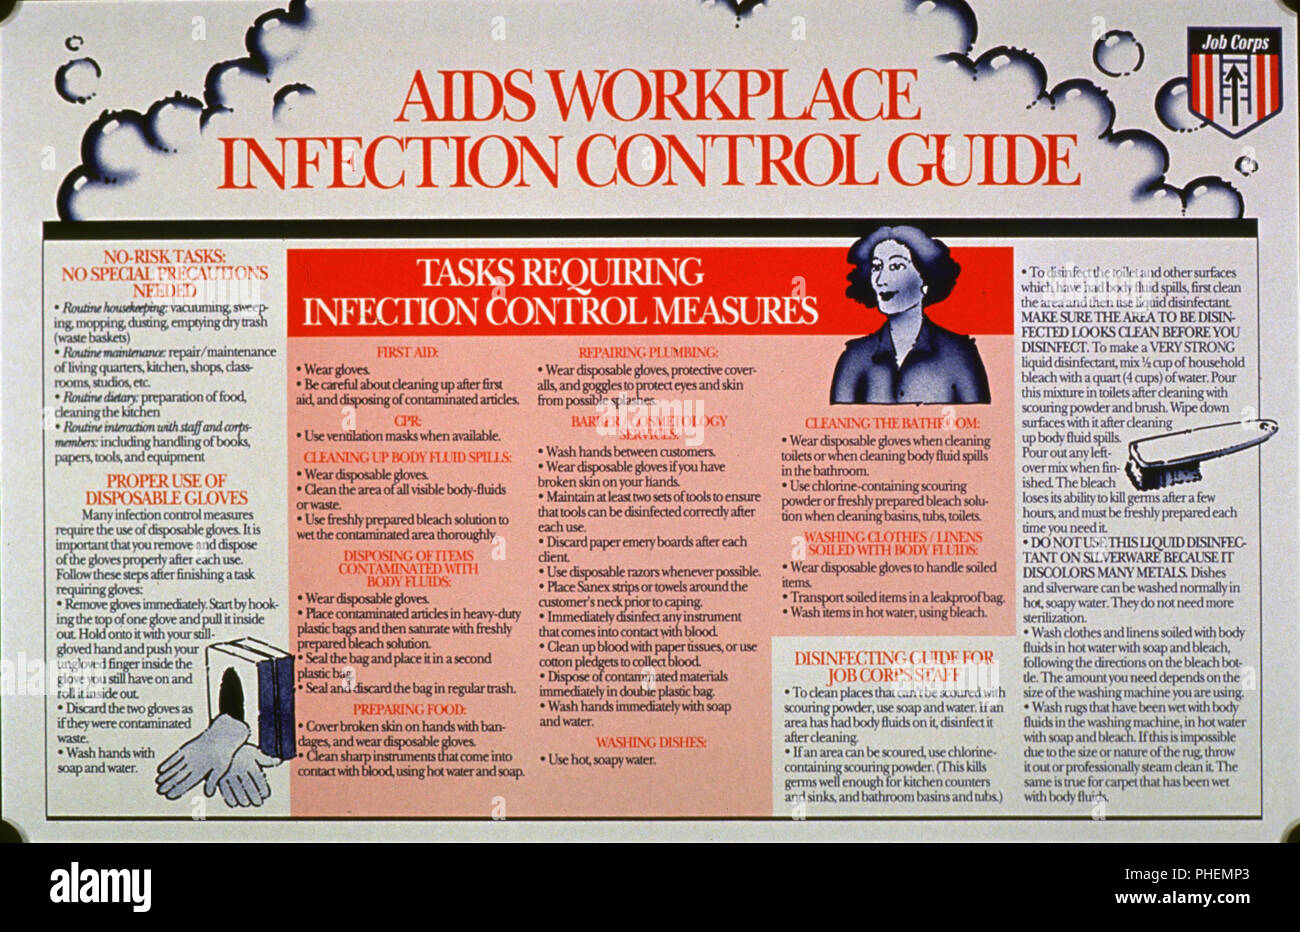 AIDS workplace infection control guide 1980s or 1990s Stock Photo